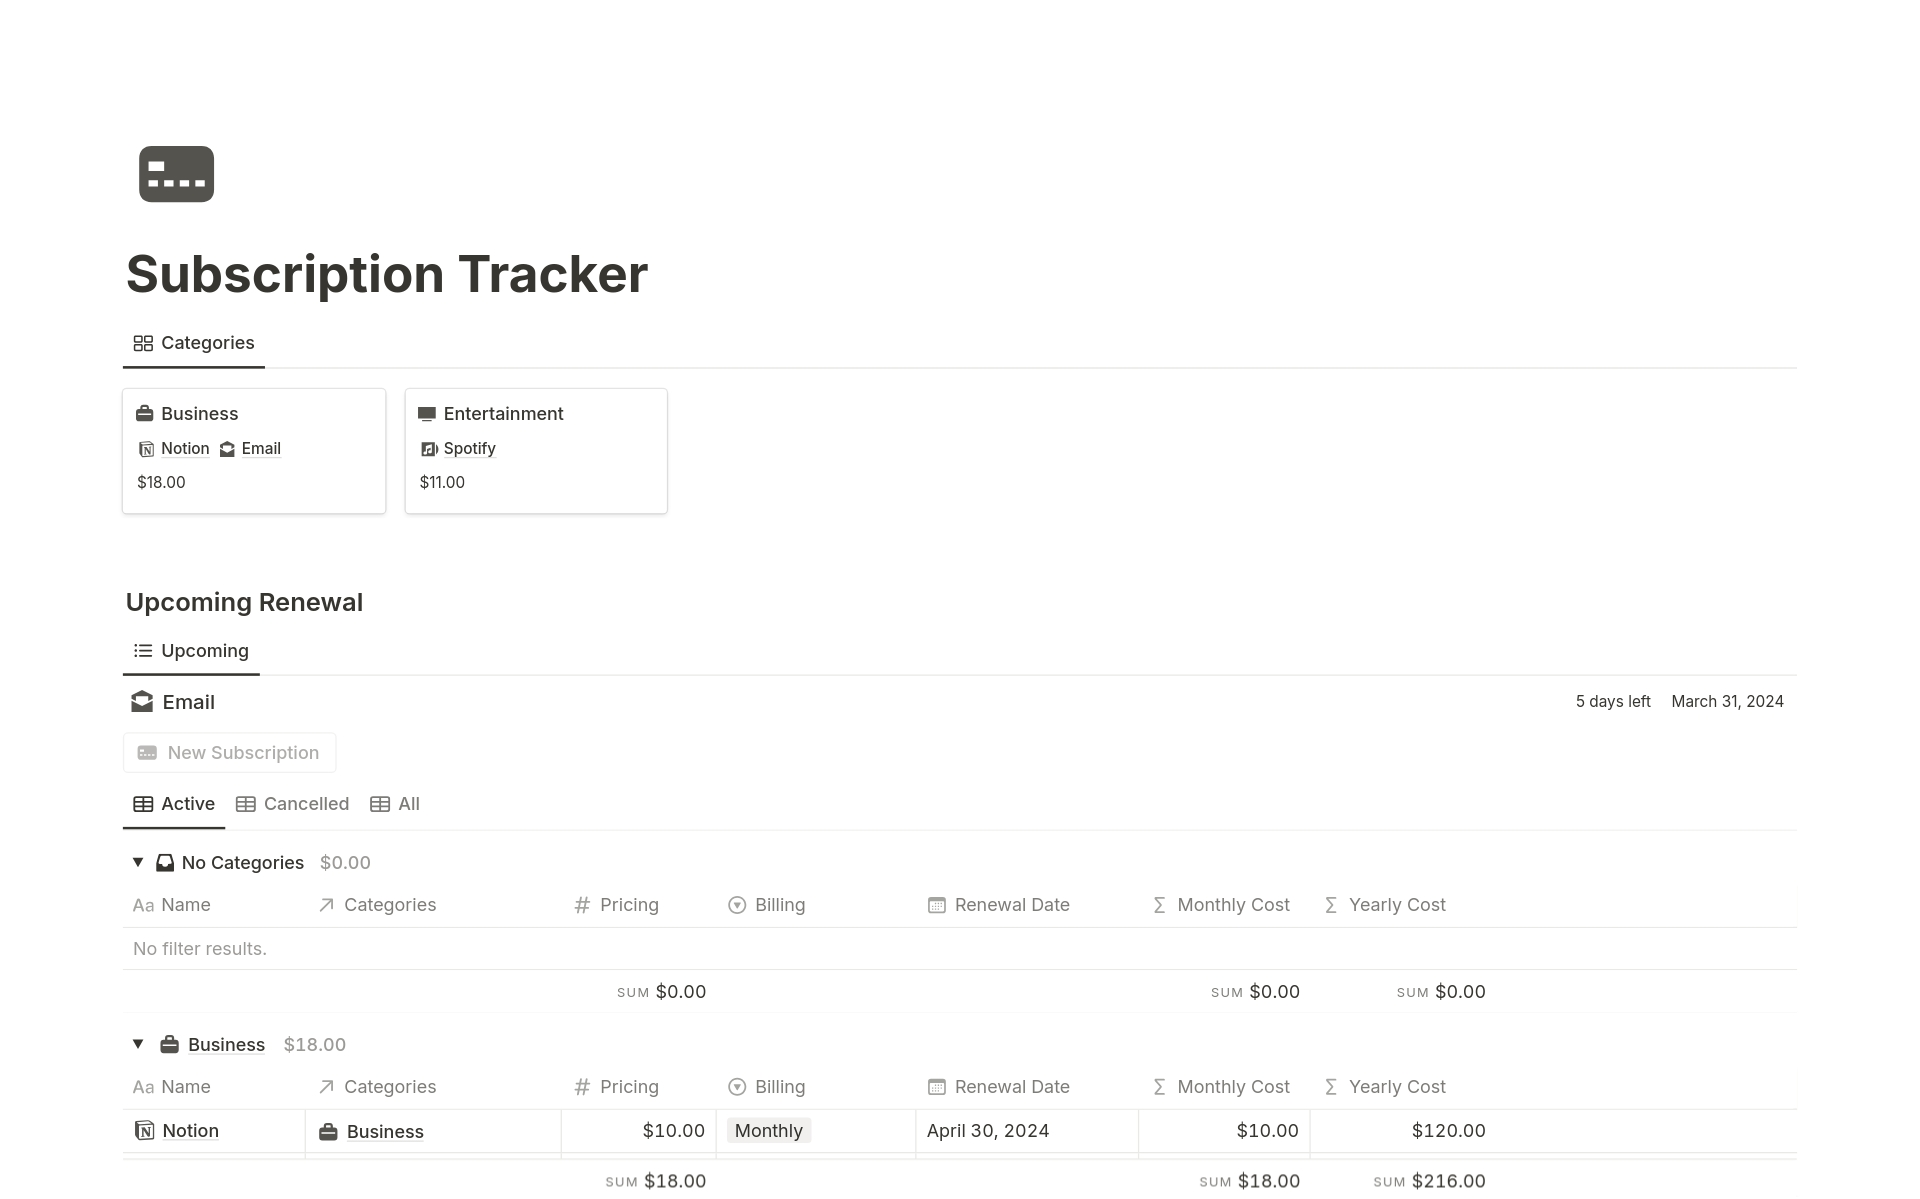 What is the purpose of the Subscription Tracker? It helps you categorize and record all your subscriptions, provides an overview of total subscription costs by categories, and calculates the average monthly/yearly cost of subscriptions both overall and within each category.